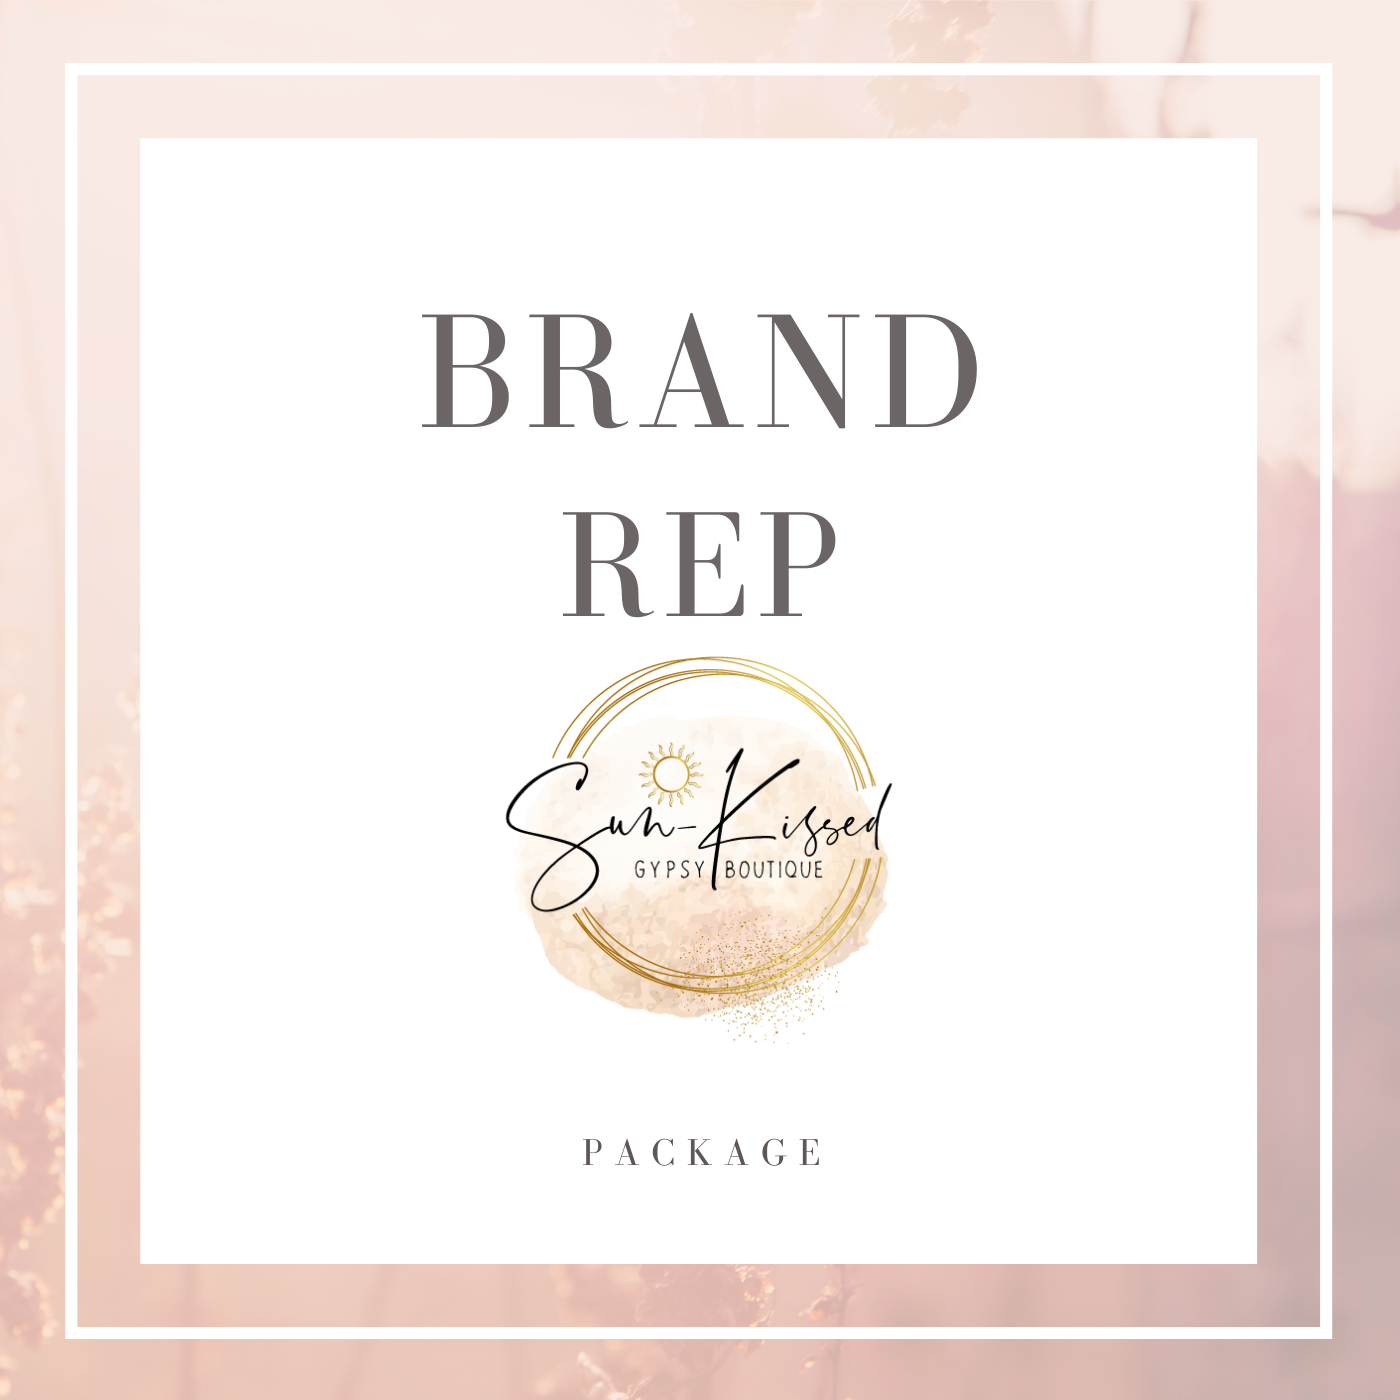 Brand Rep Package